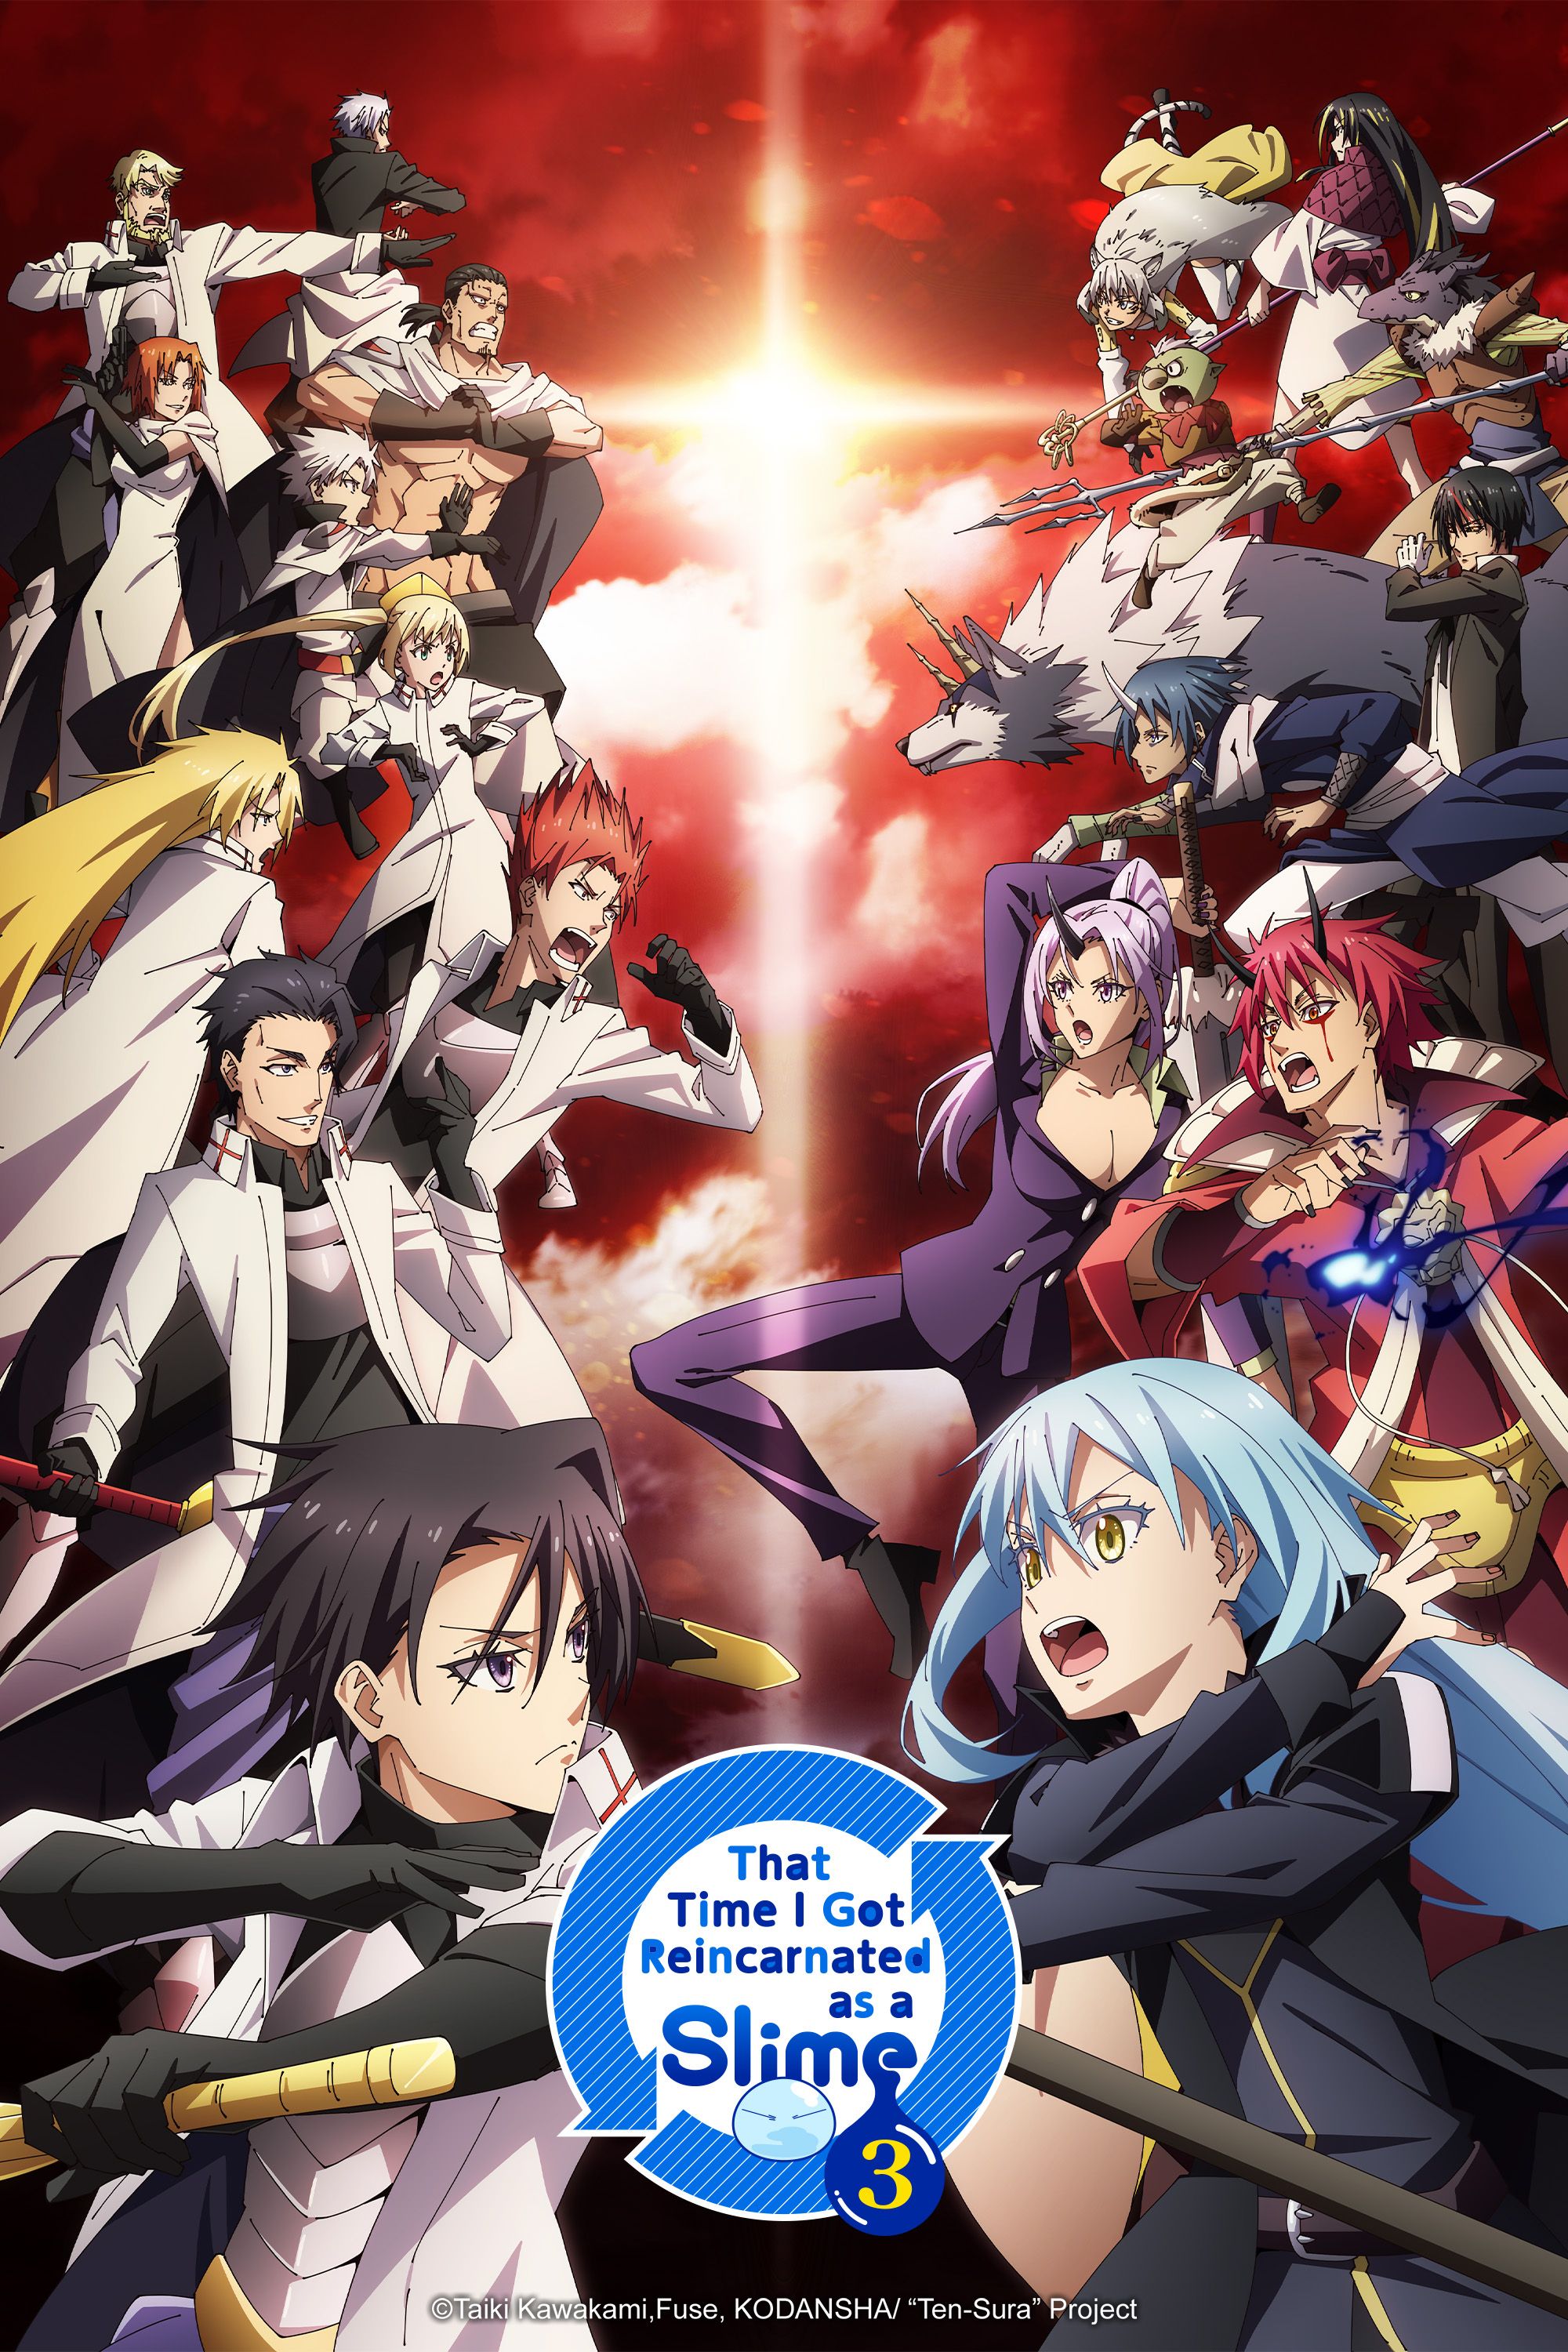 Season 3 visual (vertical) of That Time I Got Reincarnated as a Slime.